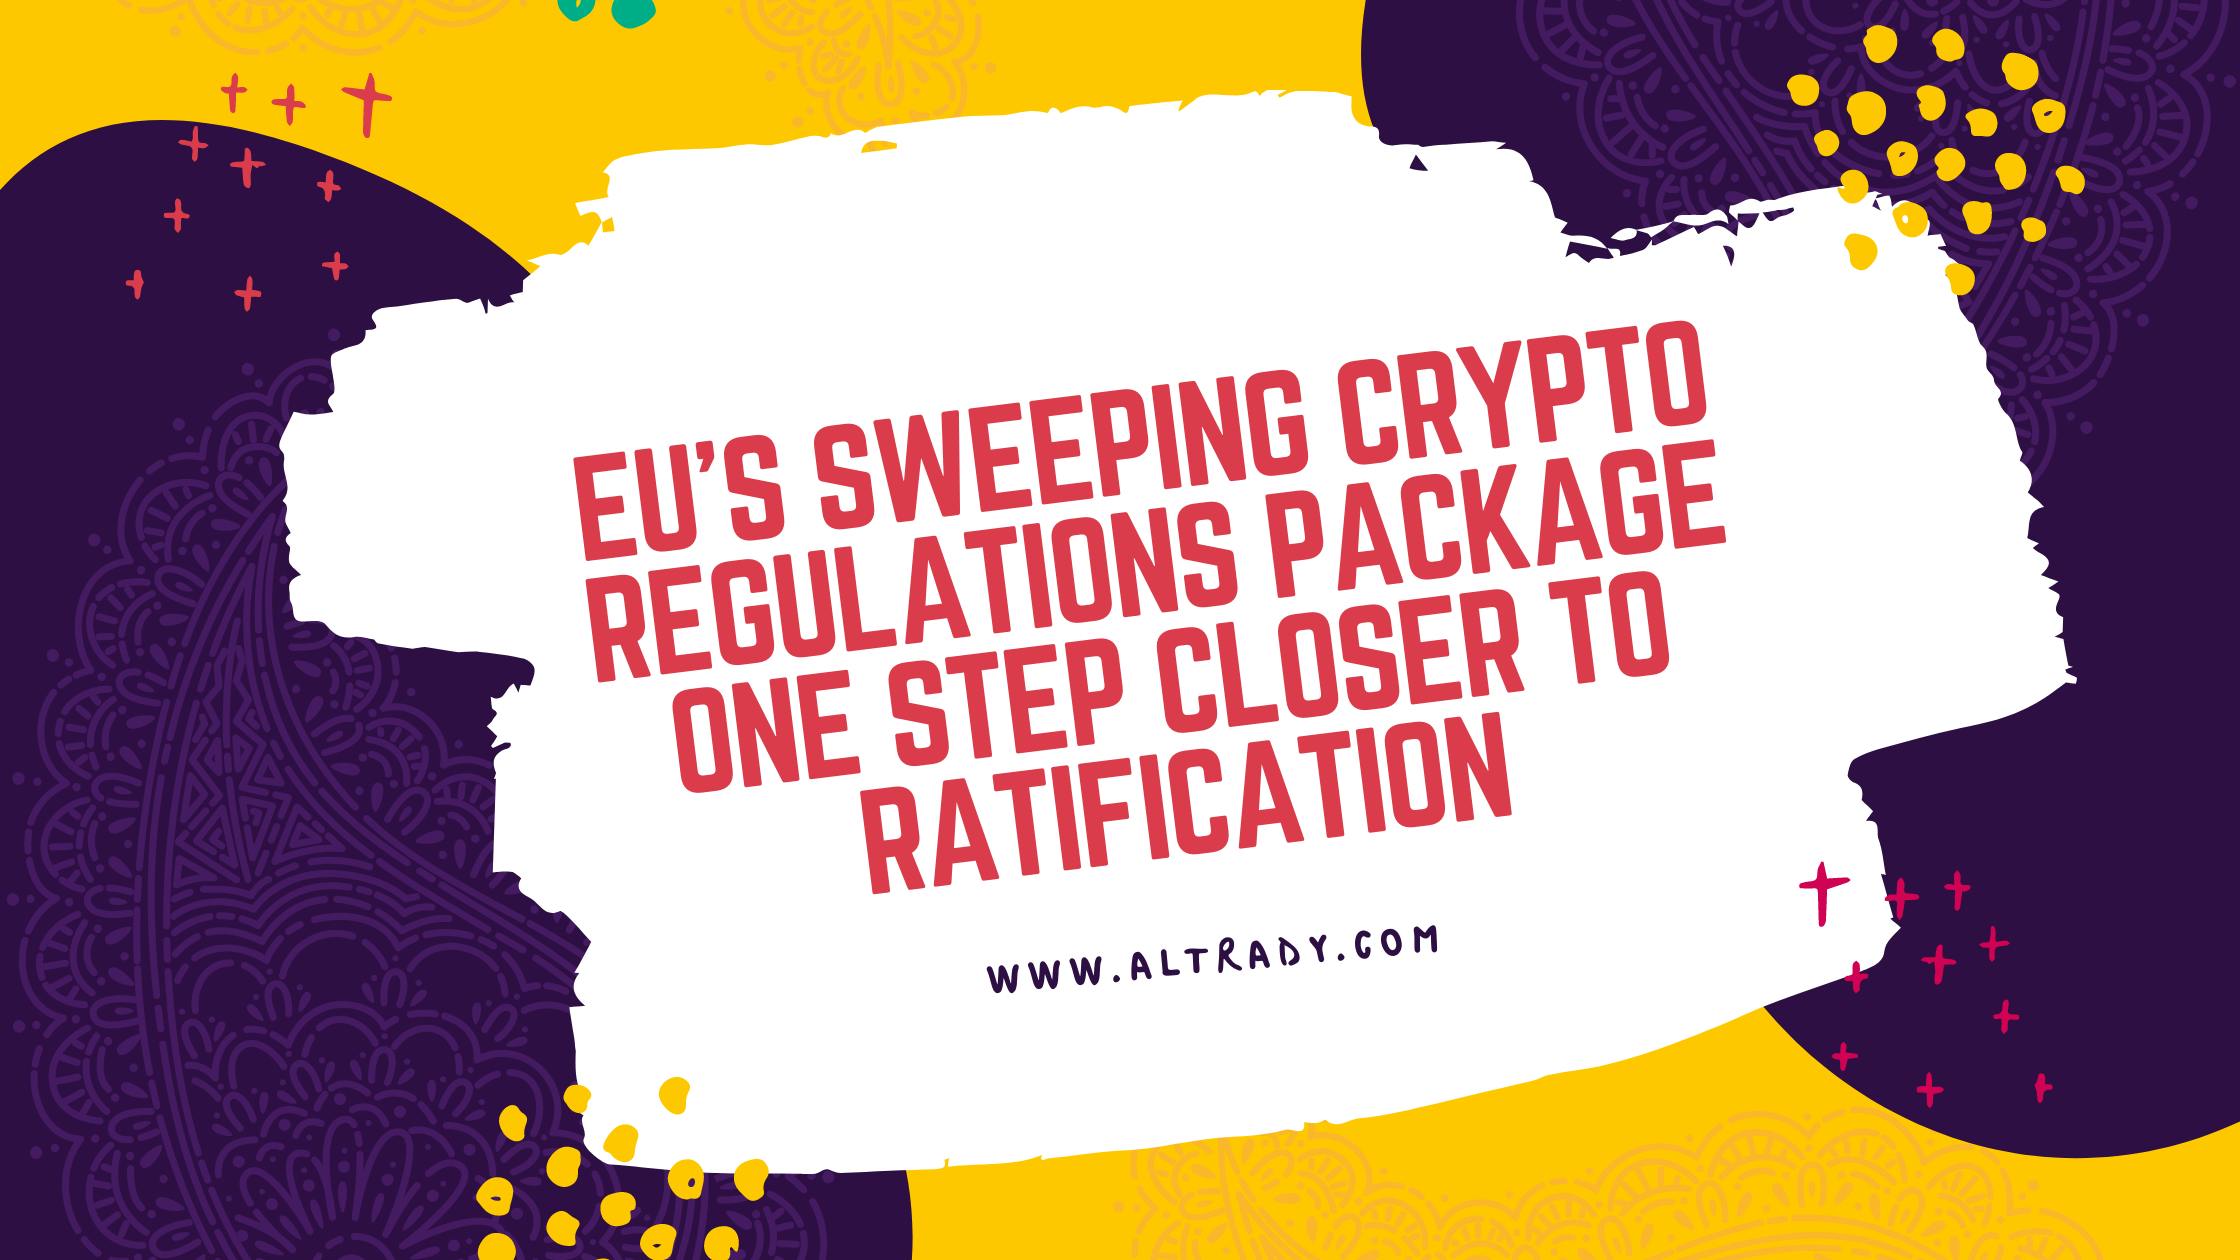 EU’s Sweeping Crypto Regulations Package One Step Closer to Ratification